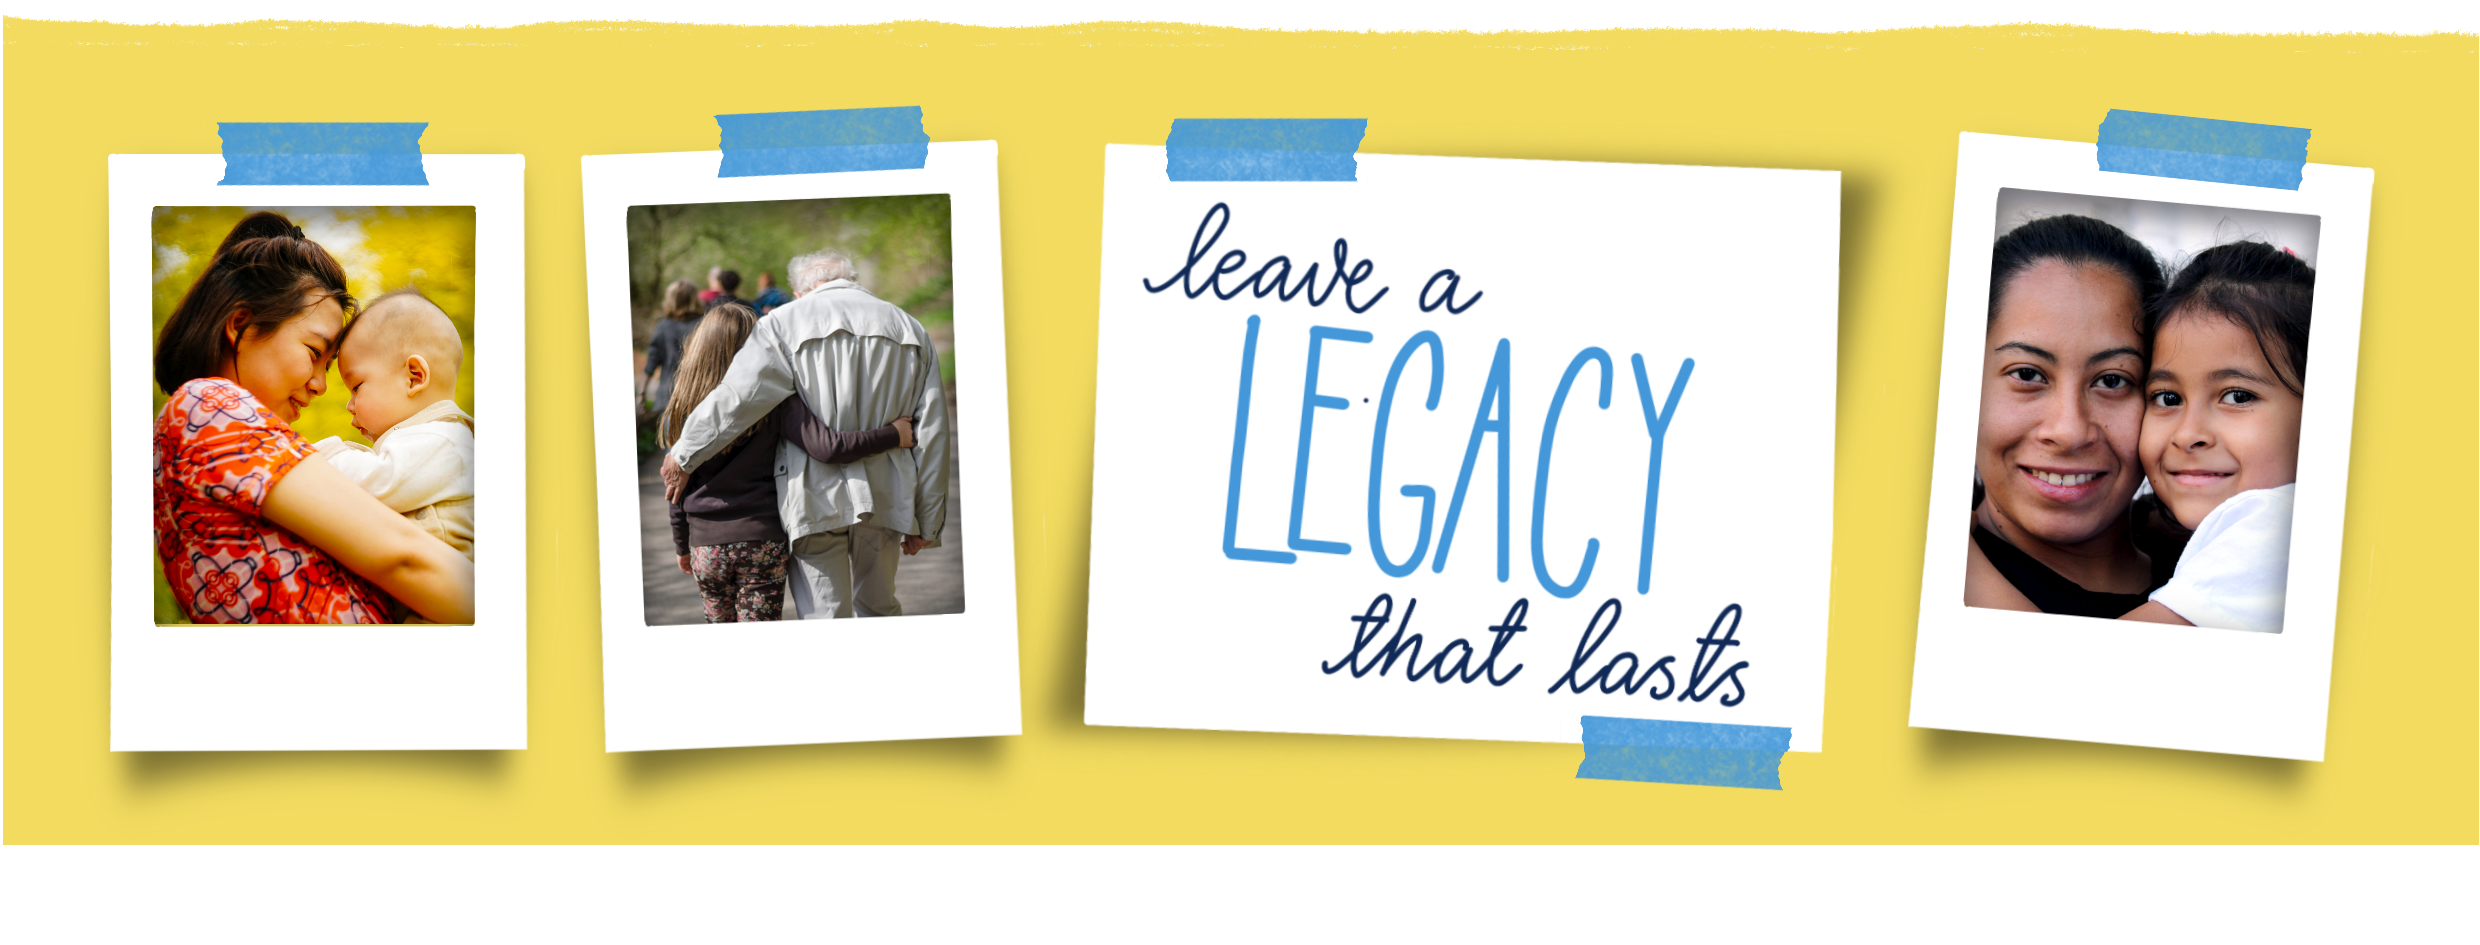 "Leave a legacy that lasts" written on a sticky note surrounded by three polaroid photos of various families